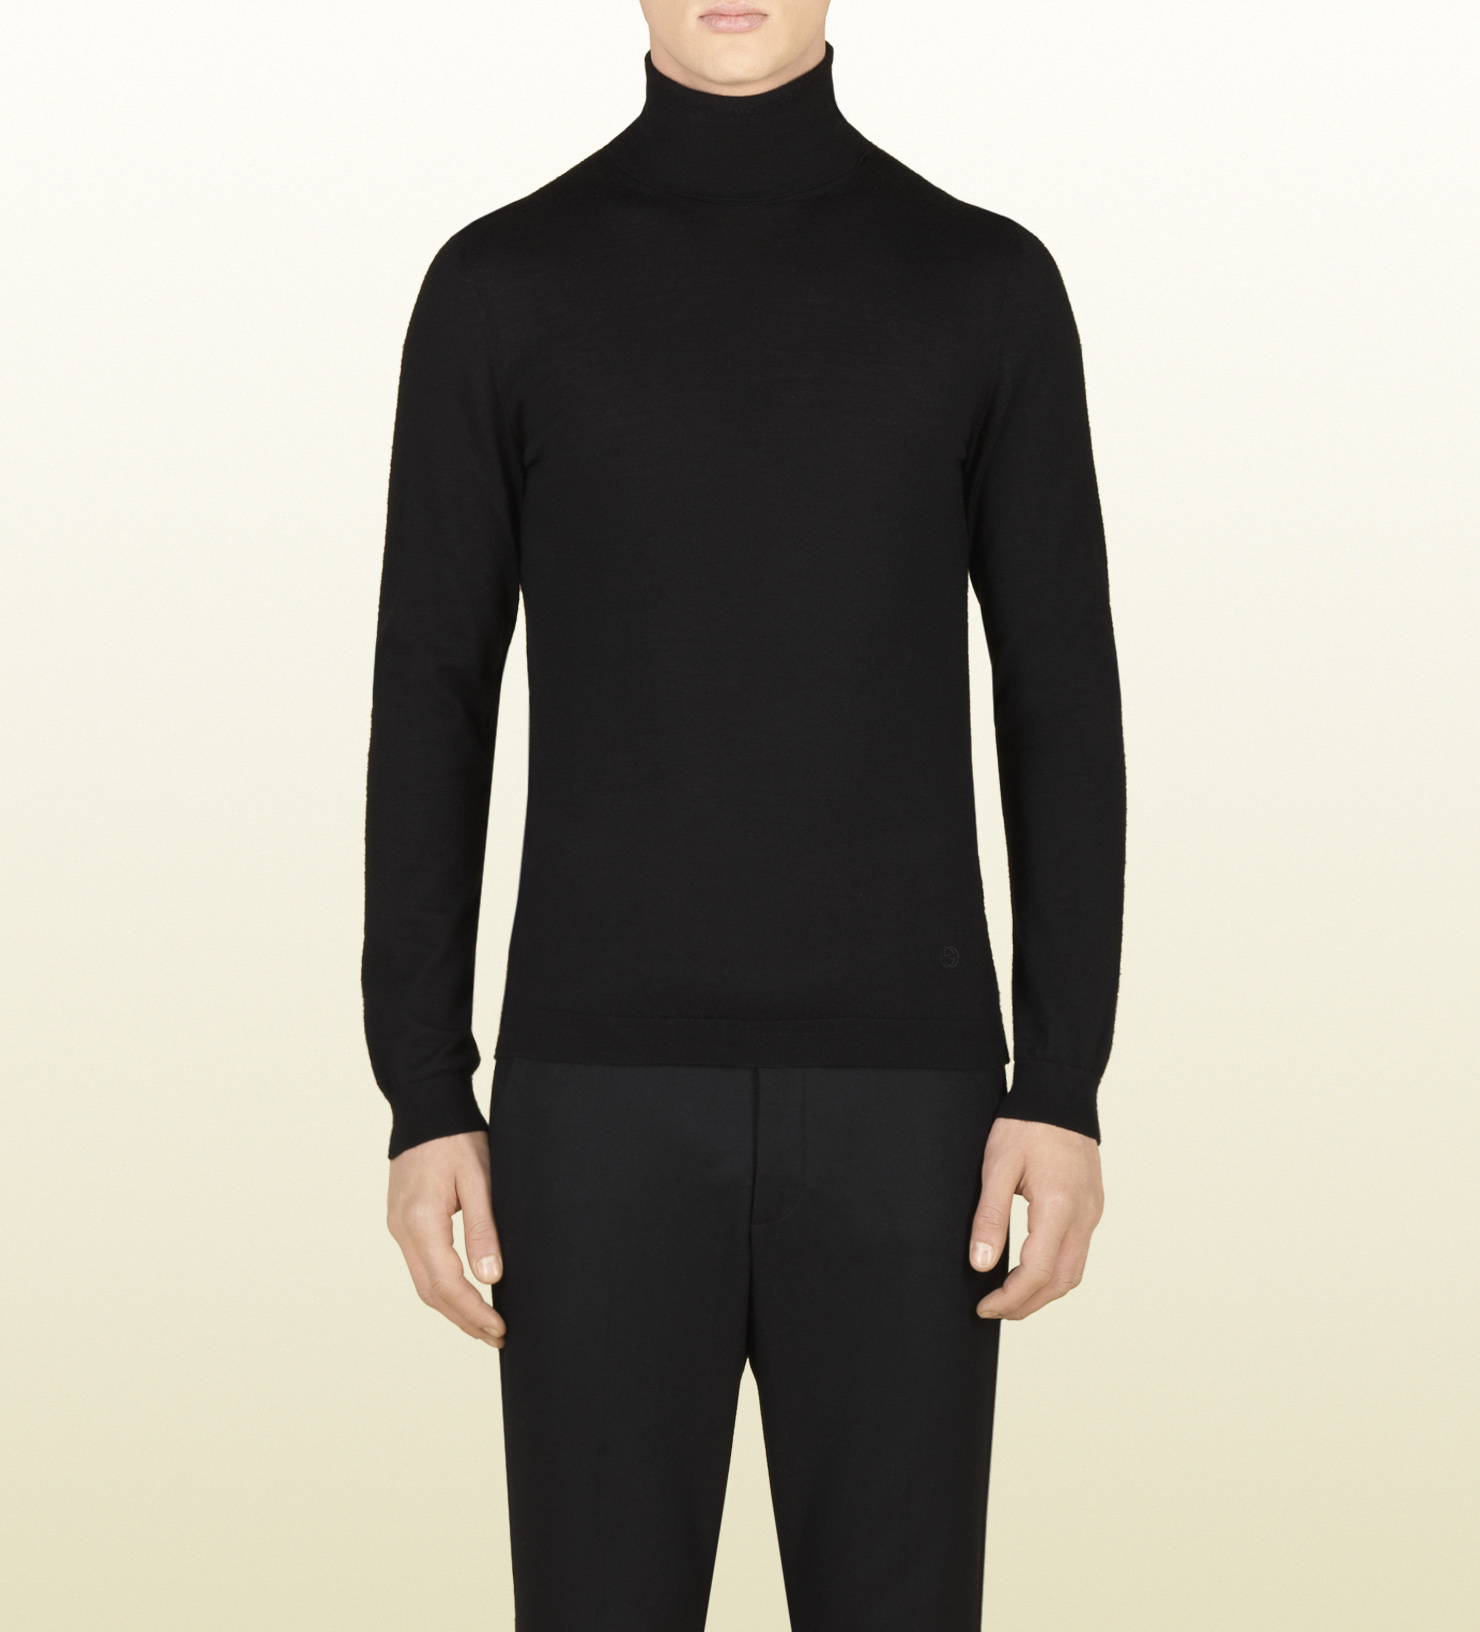 Gucci Cashmere Turtleneck Sweater in Black for Men - Lyst